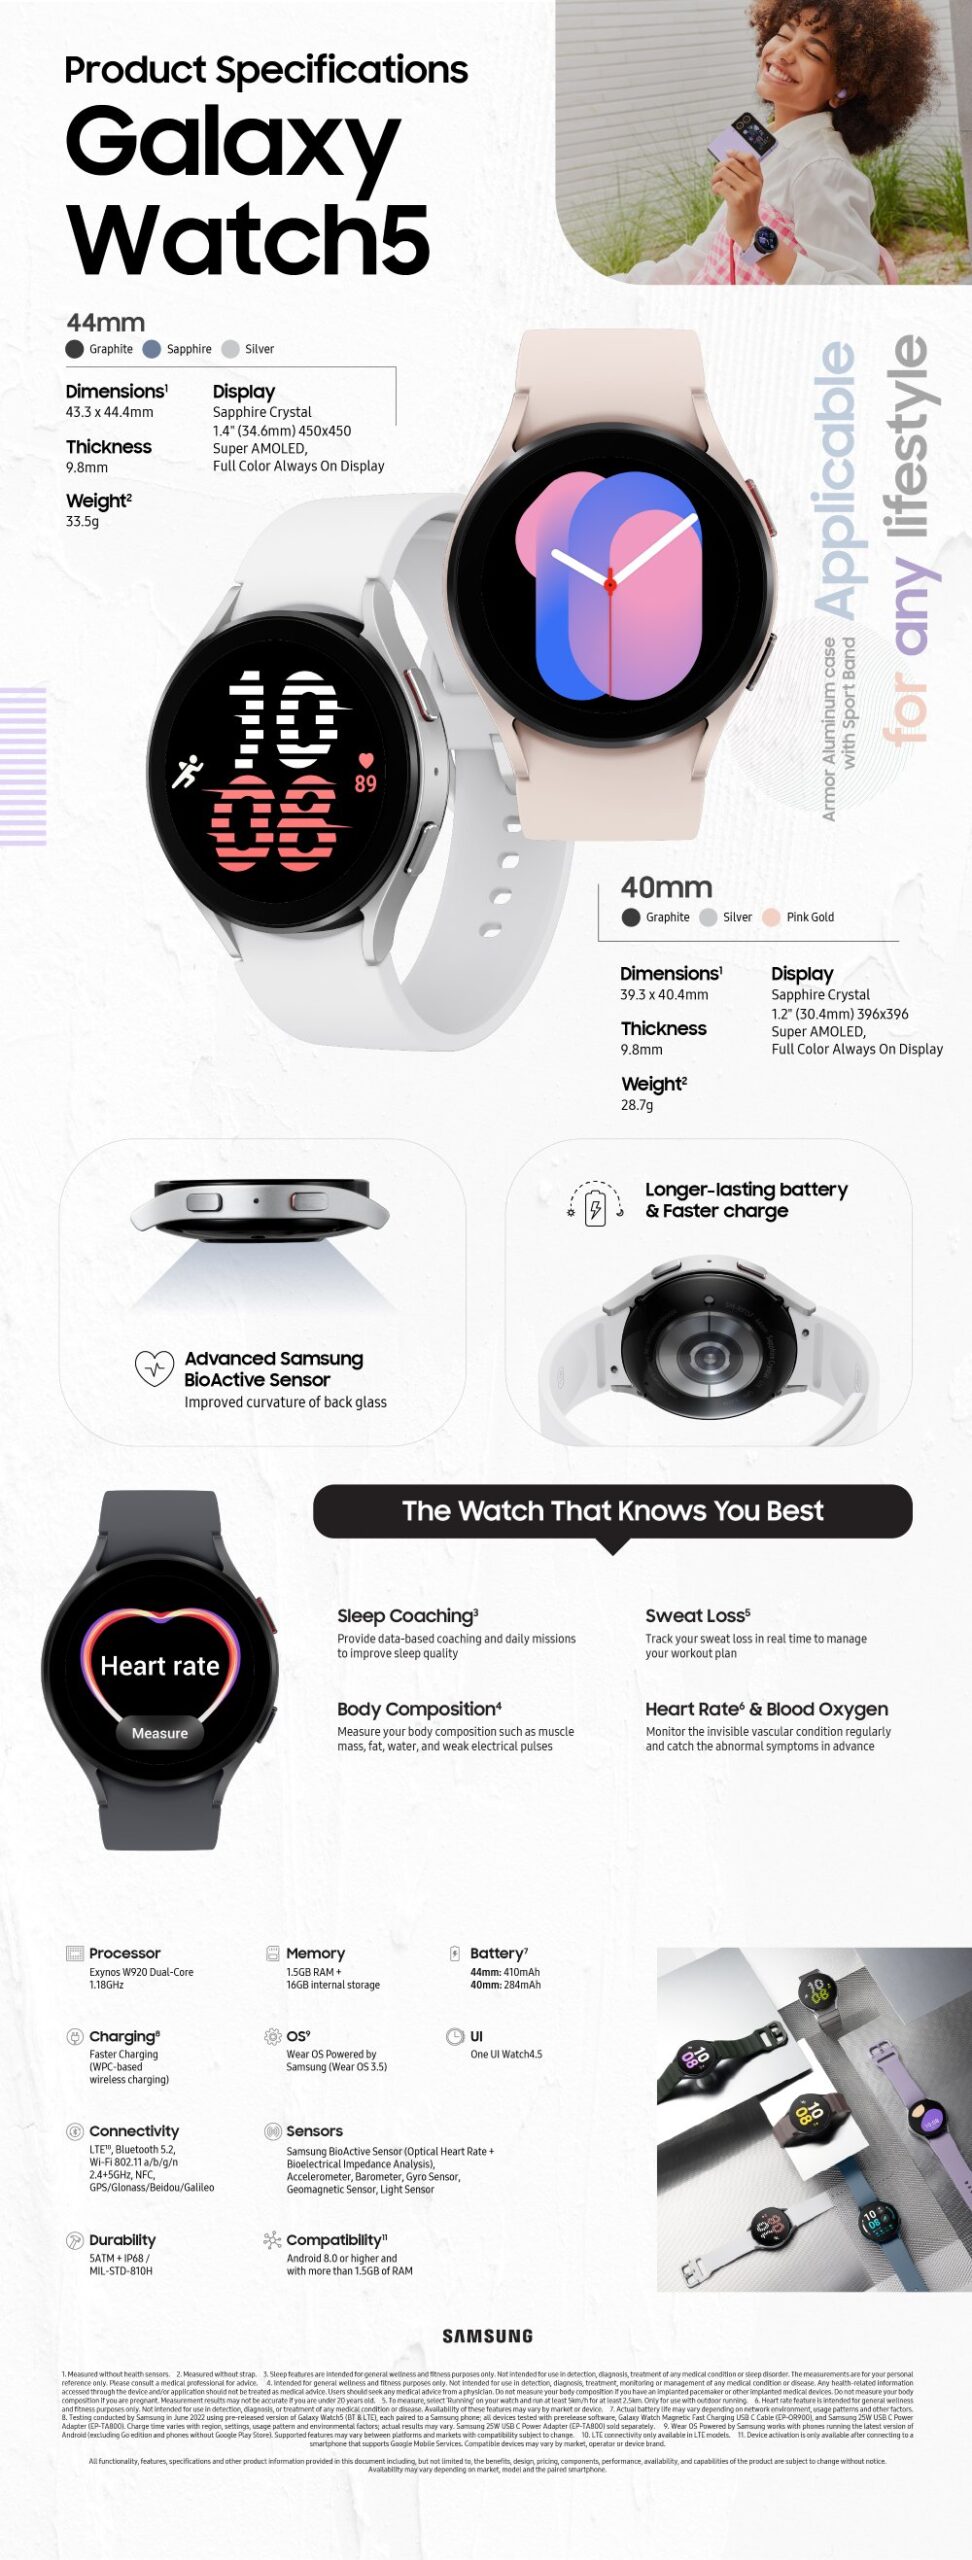 Galaxy Watch 5 Product Specifications